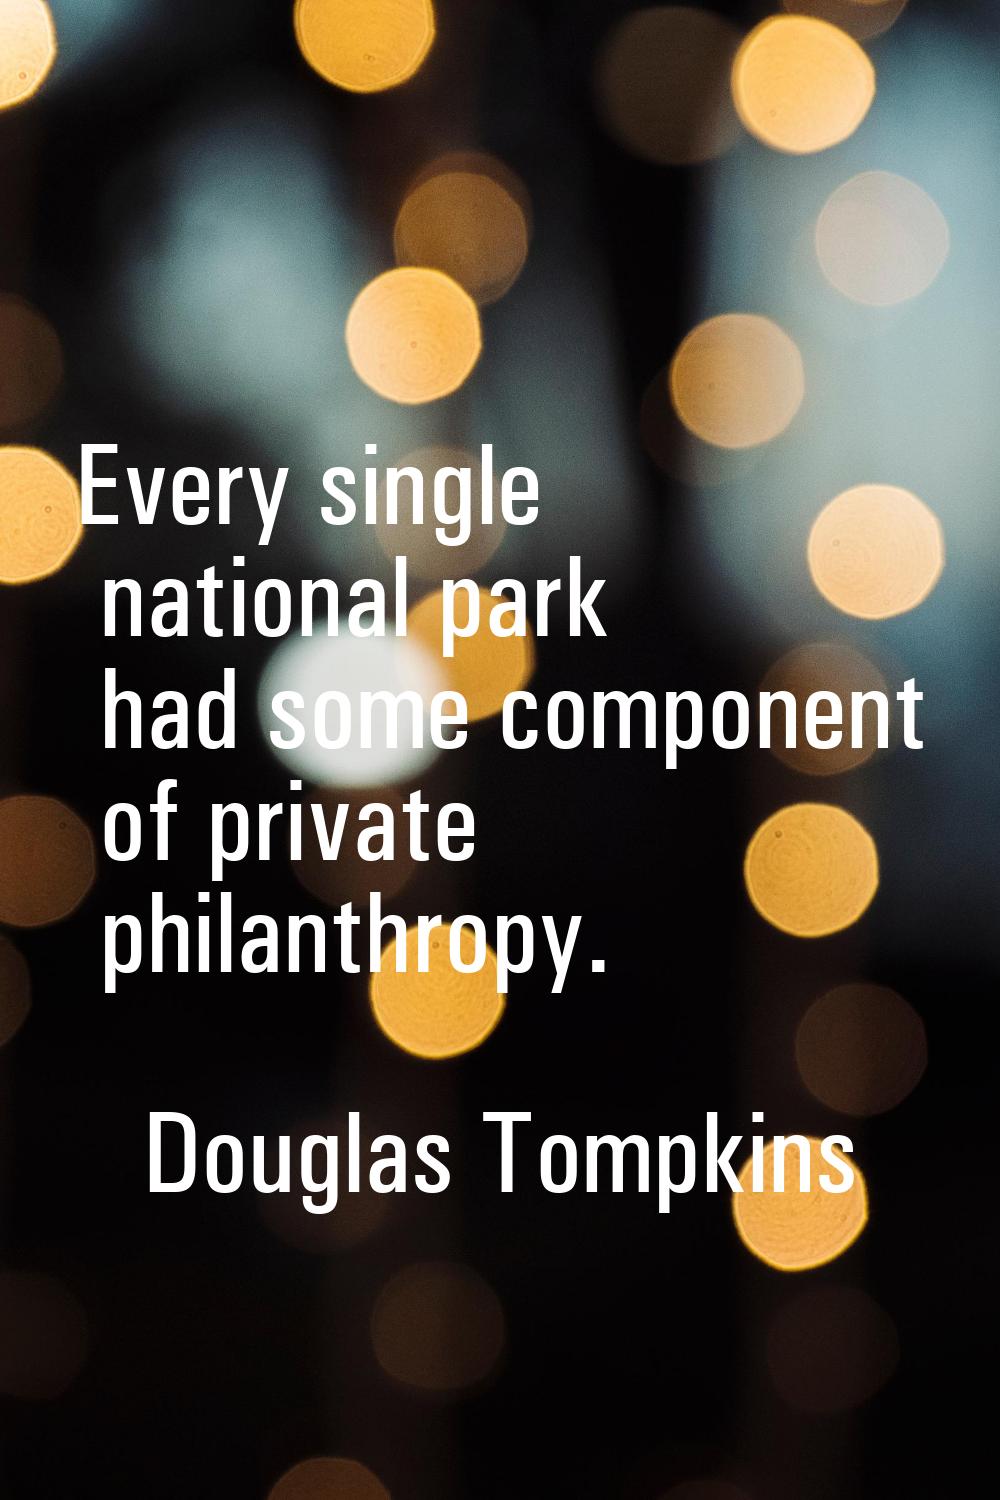 Every single national park had some component of private philanthropy.